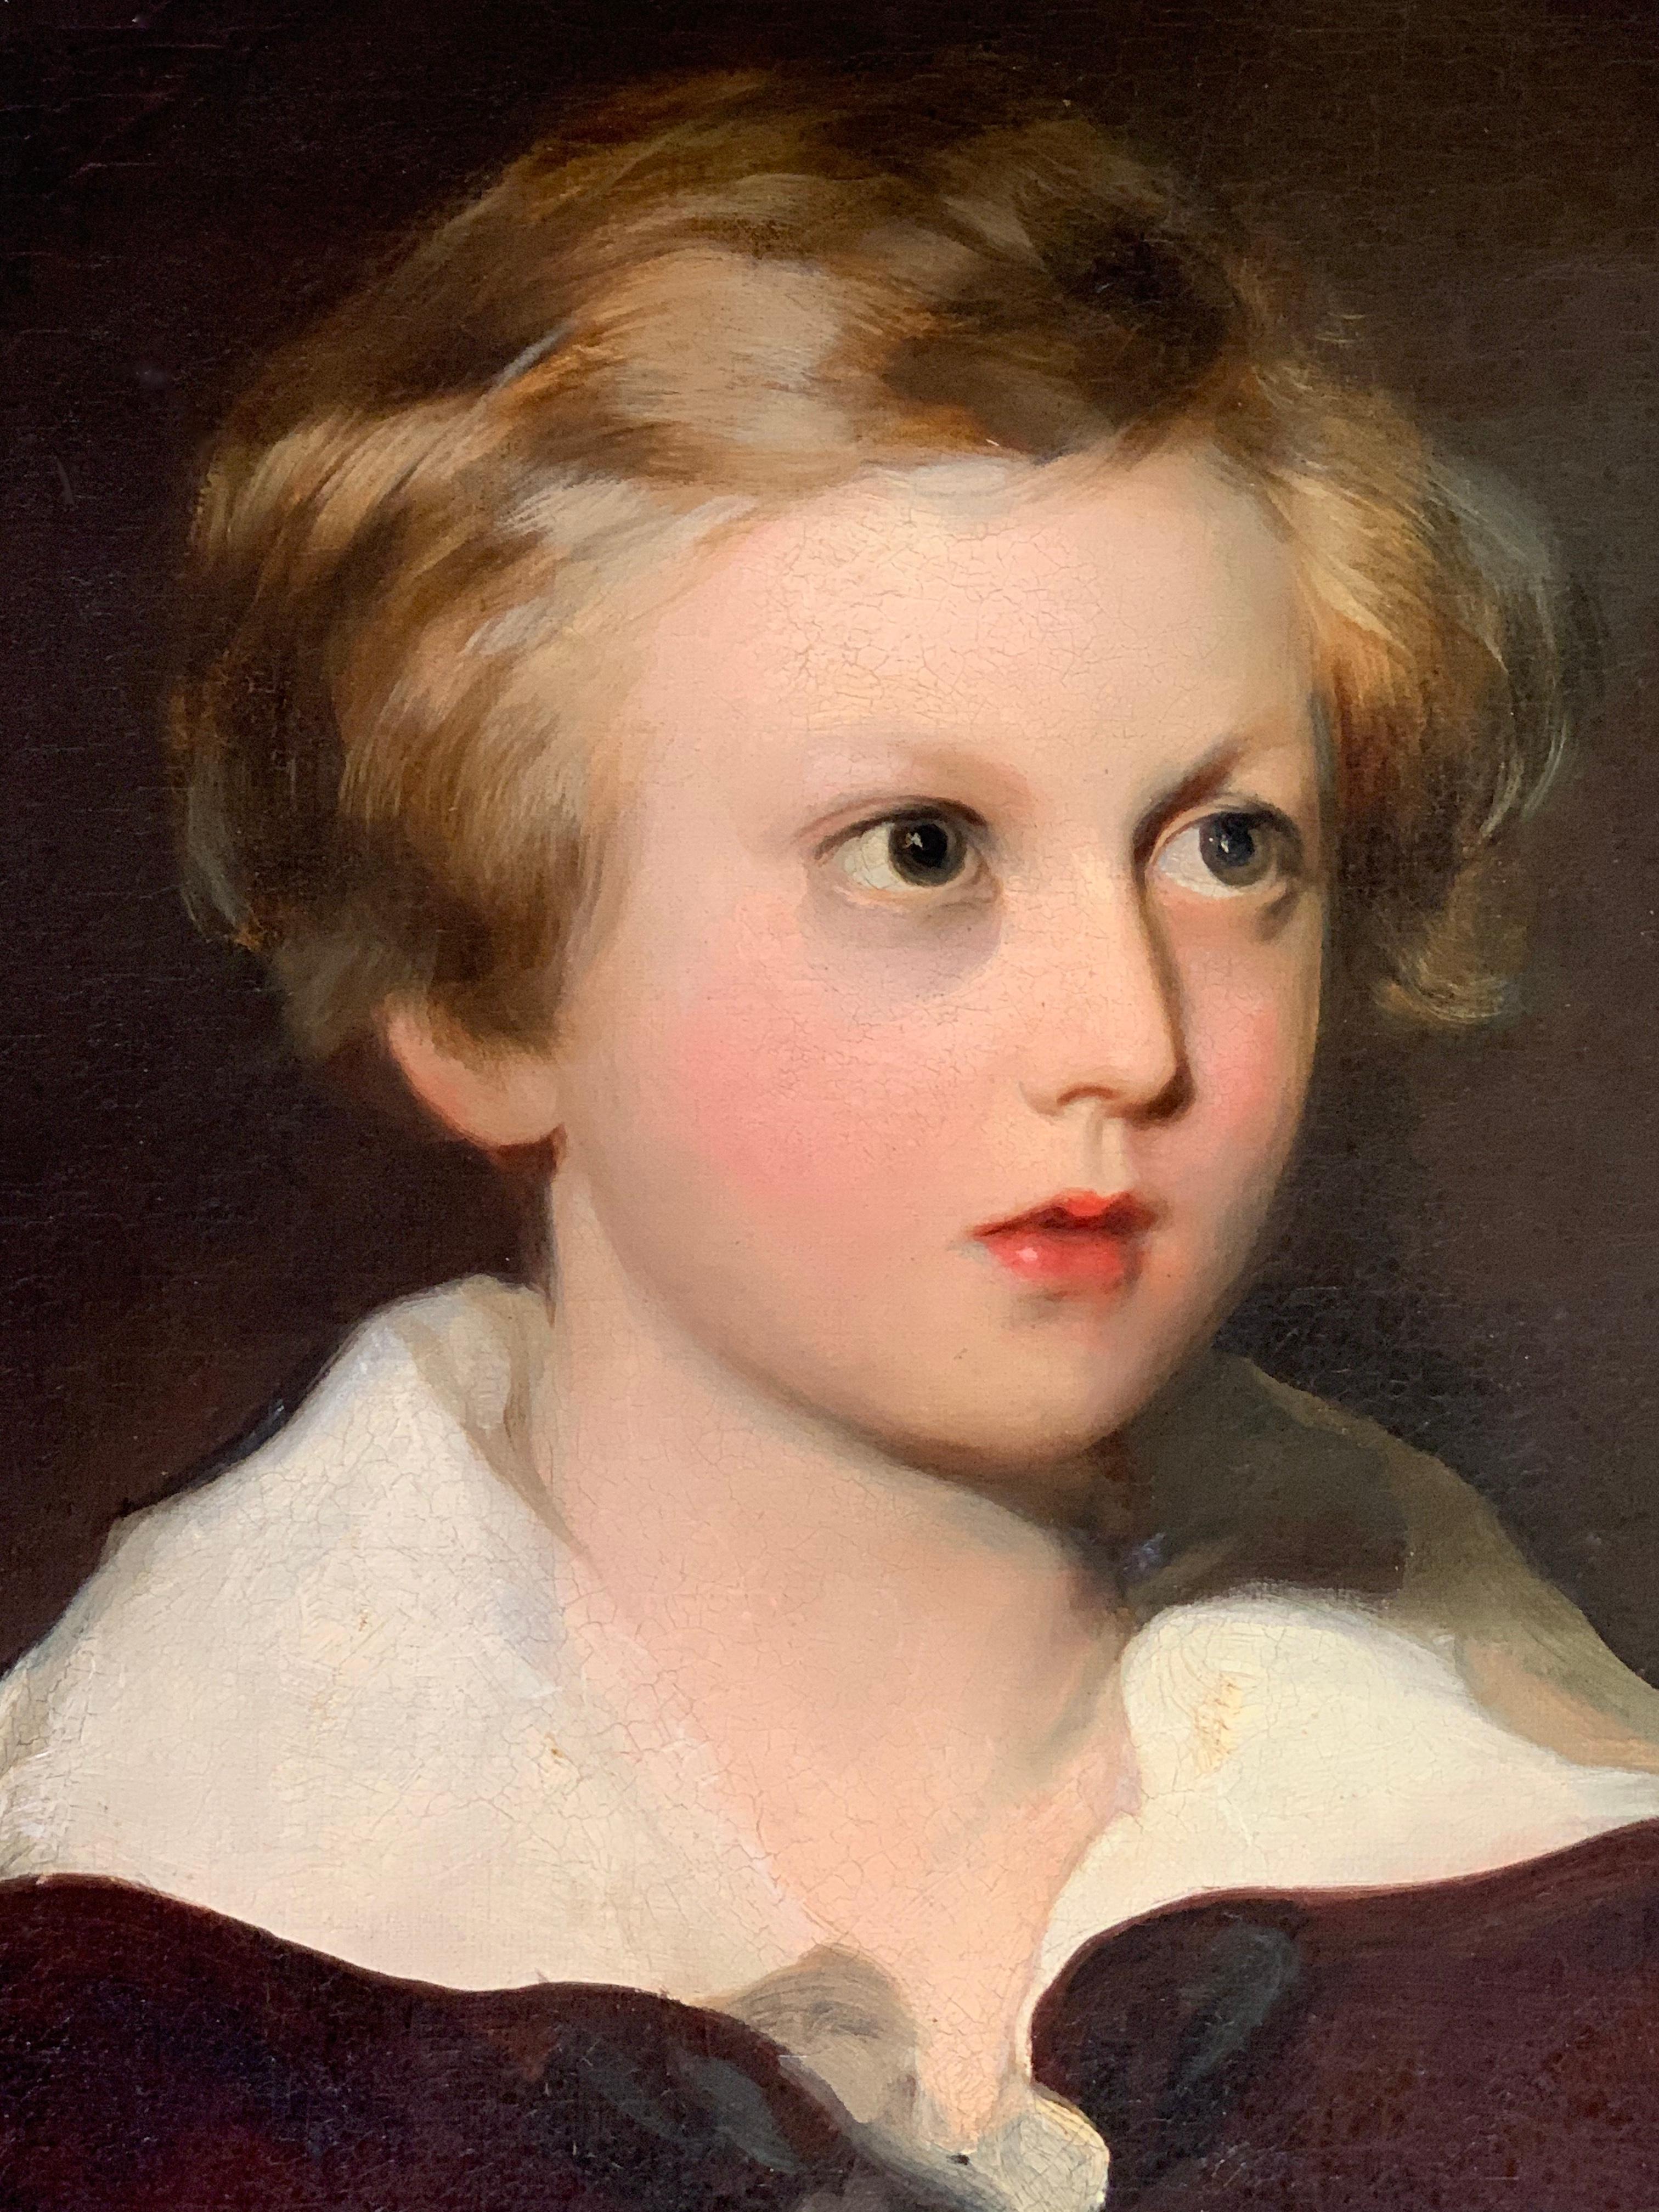 19th Century English Oil on Canvas Portrait of a Young Boy (Master Fletcher) 1